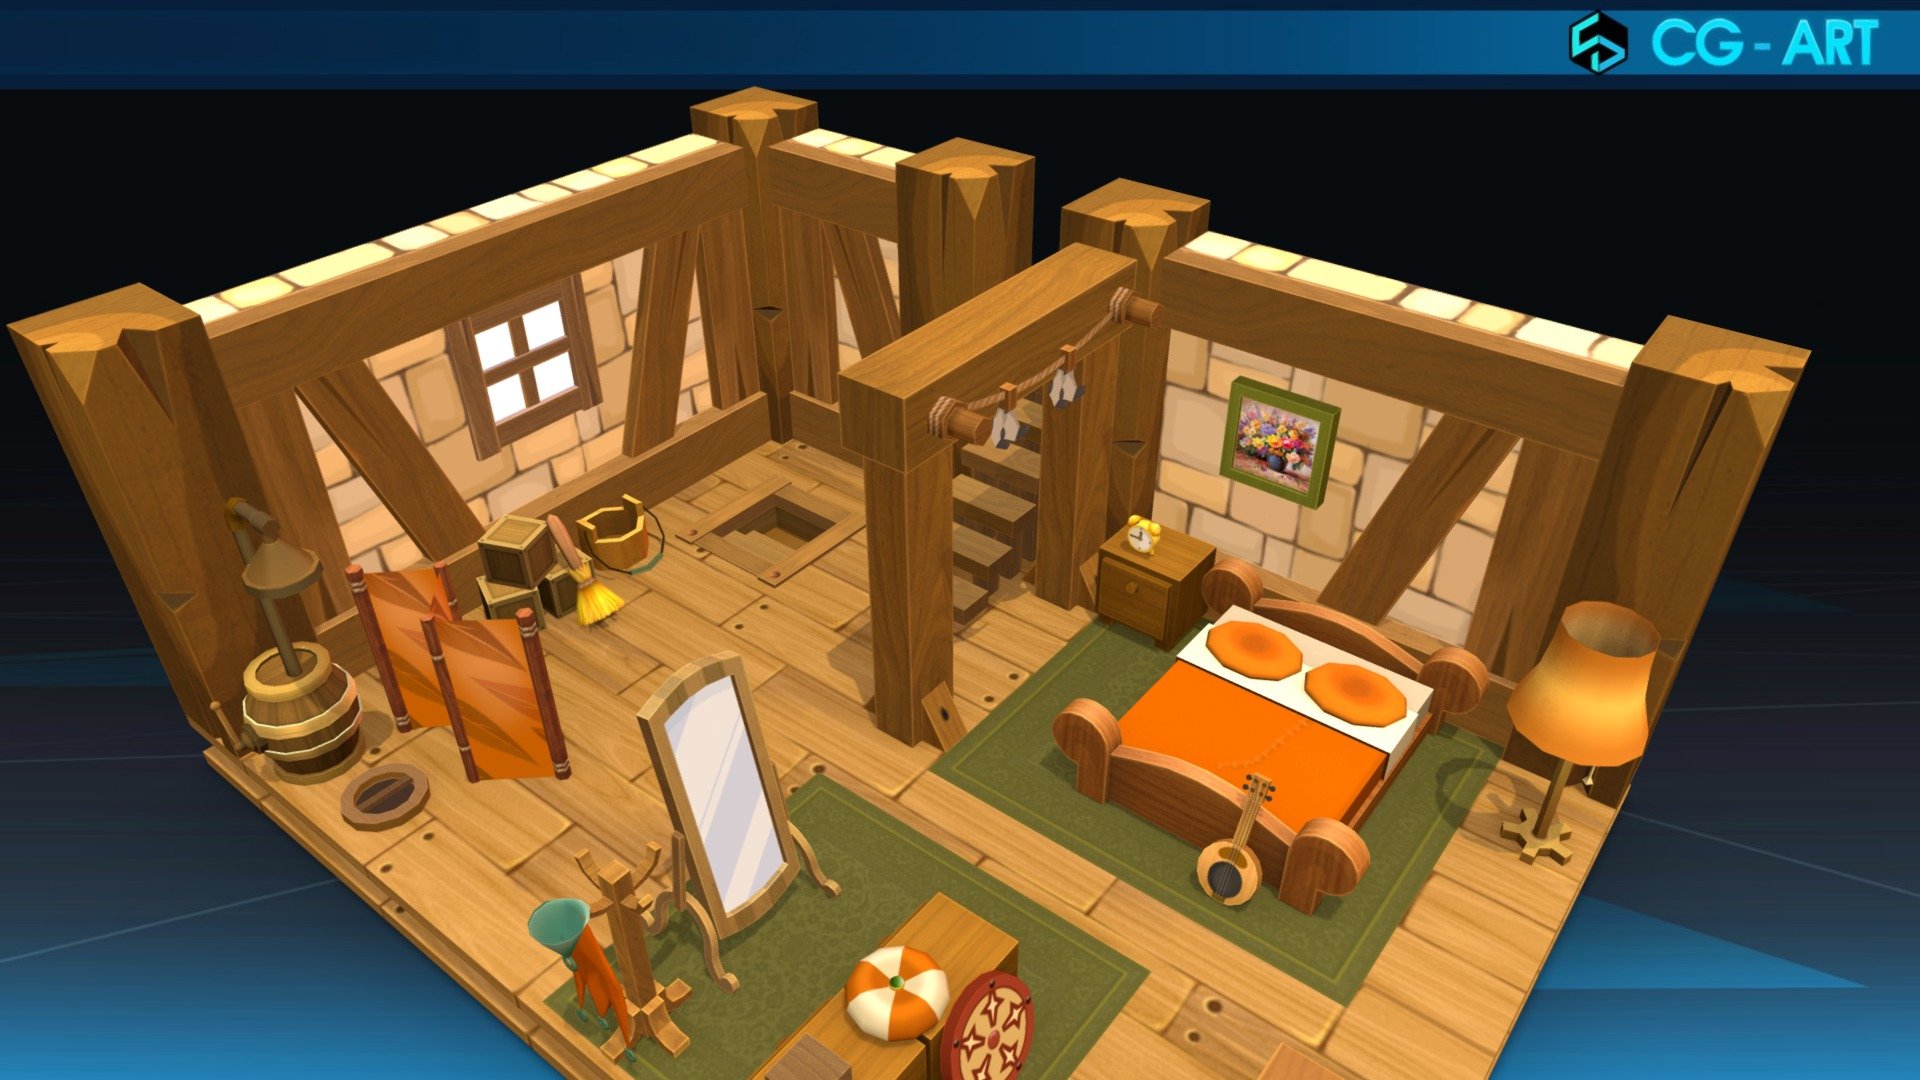 Inspired by the unique design of houses for players in the game Dofus, we continue to turn them into visual 3D models to show our love for this game.


Modeler:  Pham Phuong Thy
Concept Source 
https://dofus.jeuxonline.info/actualite/35870/devblog-refontes-graphique-27
 - Players' Houses 02_Sufokia Dofus - 3D model by cgart.com (@goart) 3d model